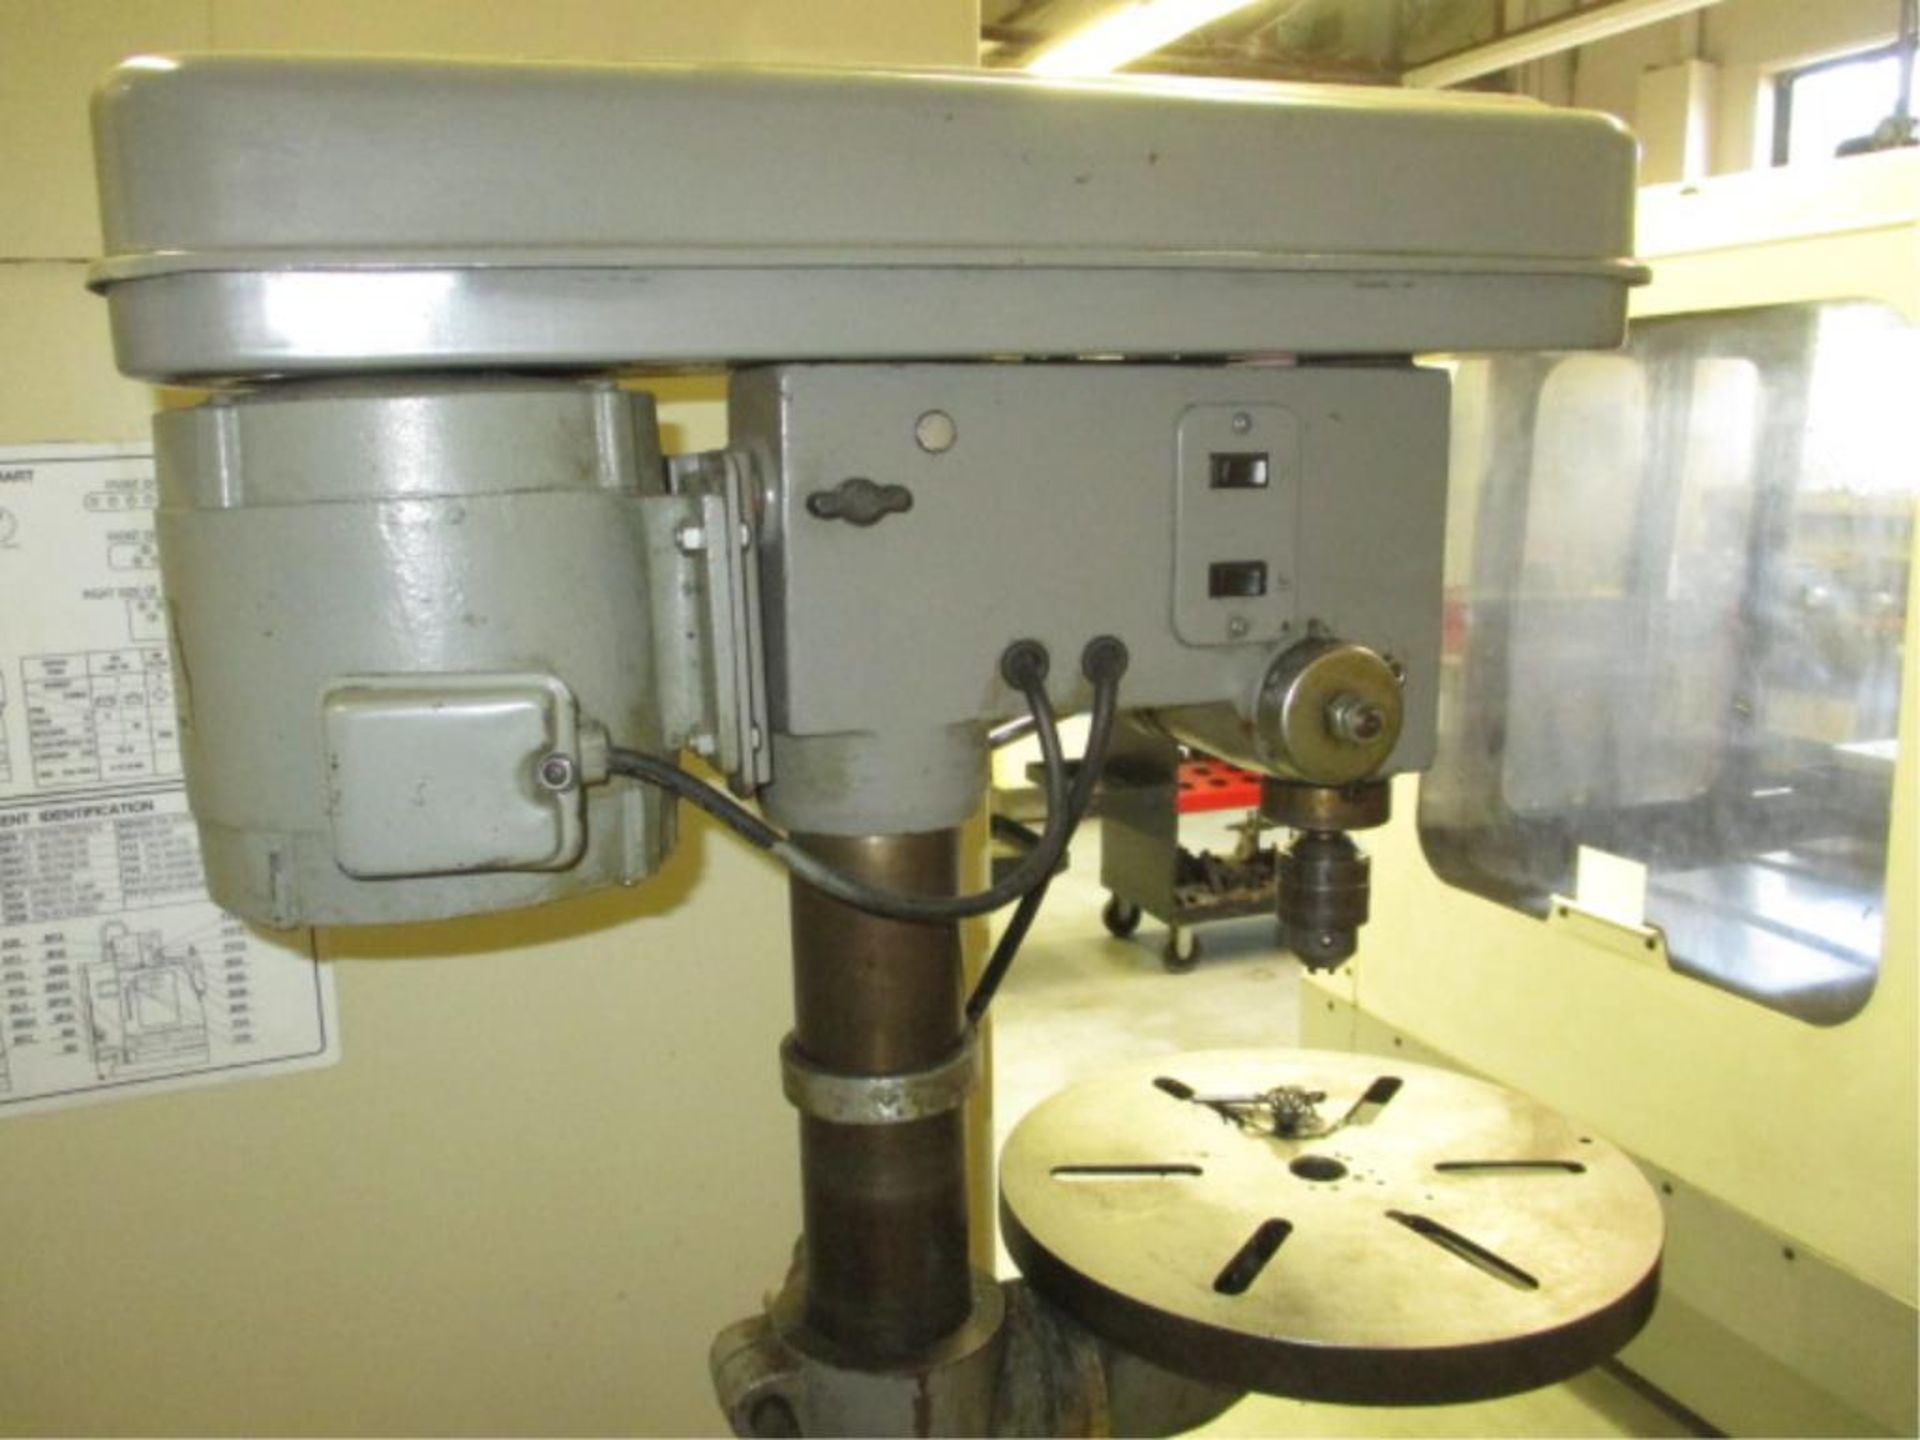 Drill Press. Orbit OR-1412F 5-Speed Industrial Drill Press, 1/2" Chuck, Spindle JT #33. S/N-4060584. - Image 2 of 2